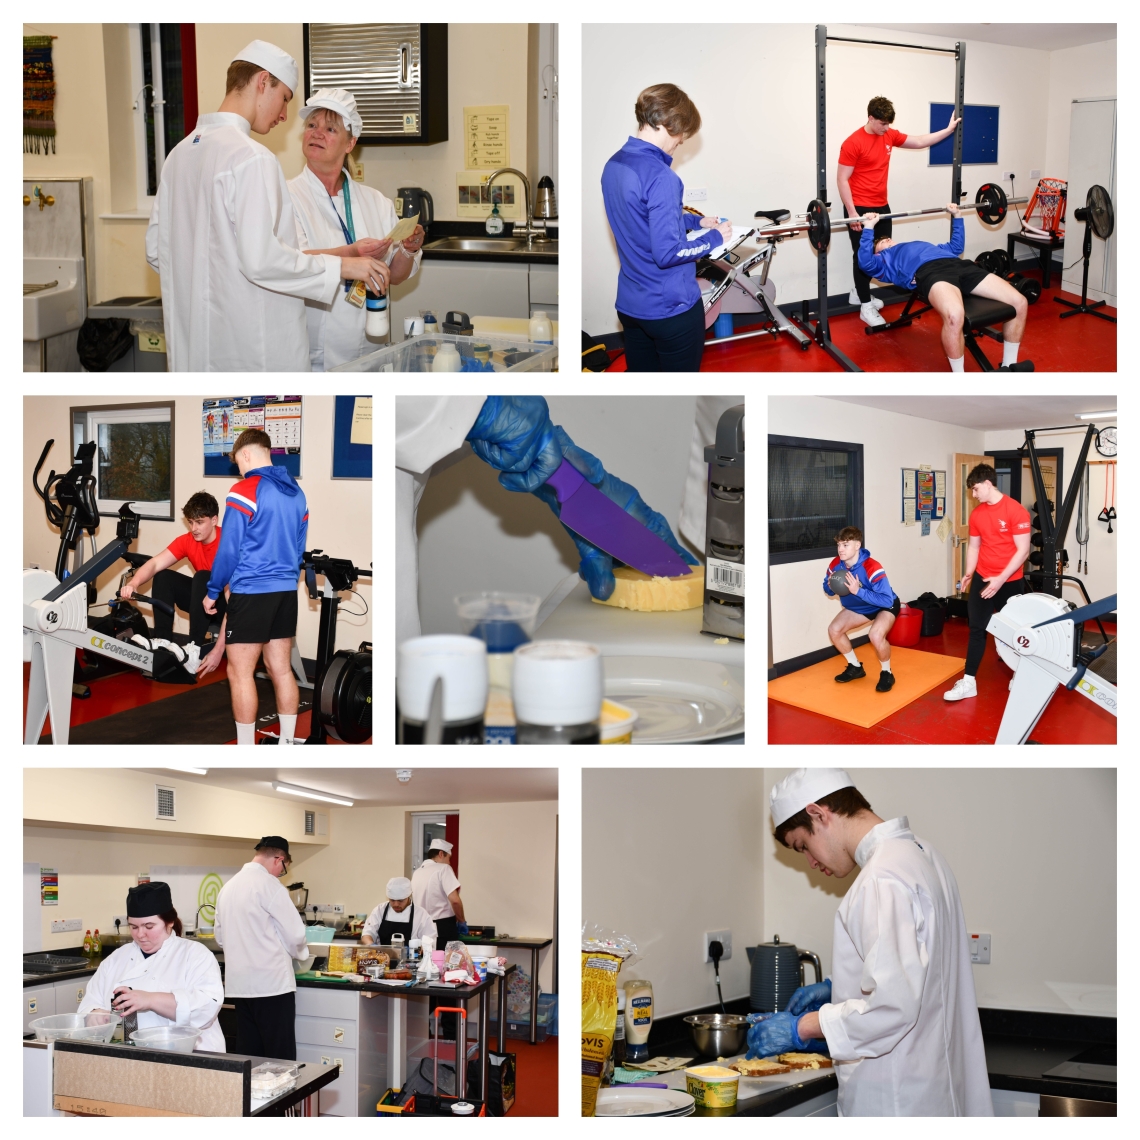 Collage of learners in skills competition